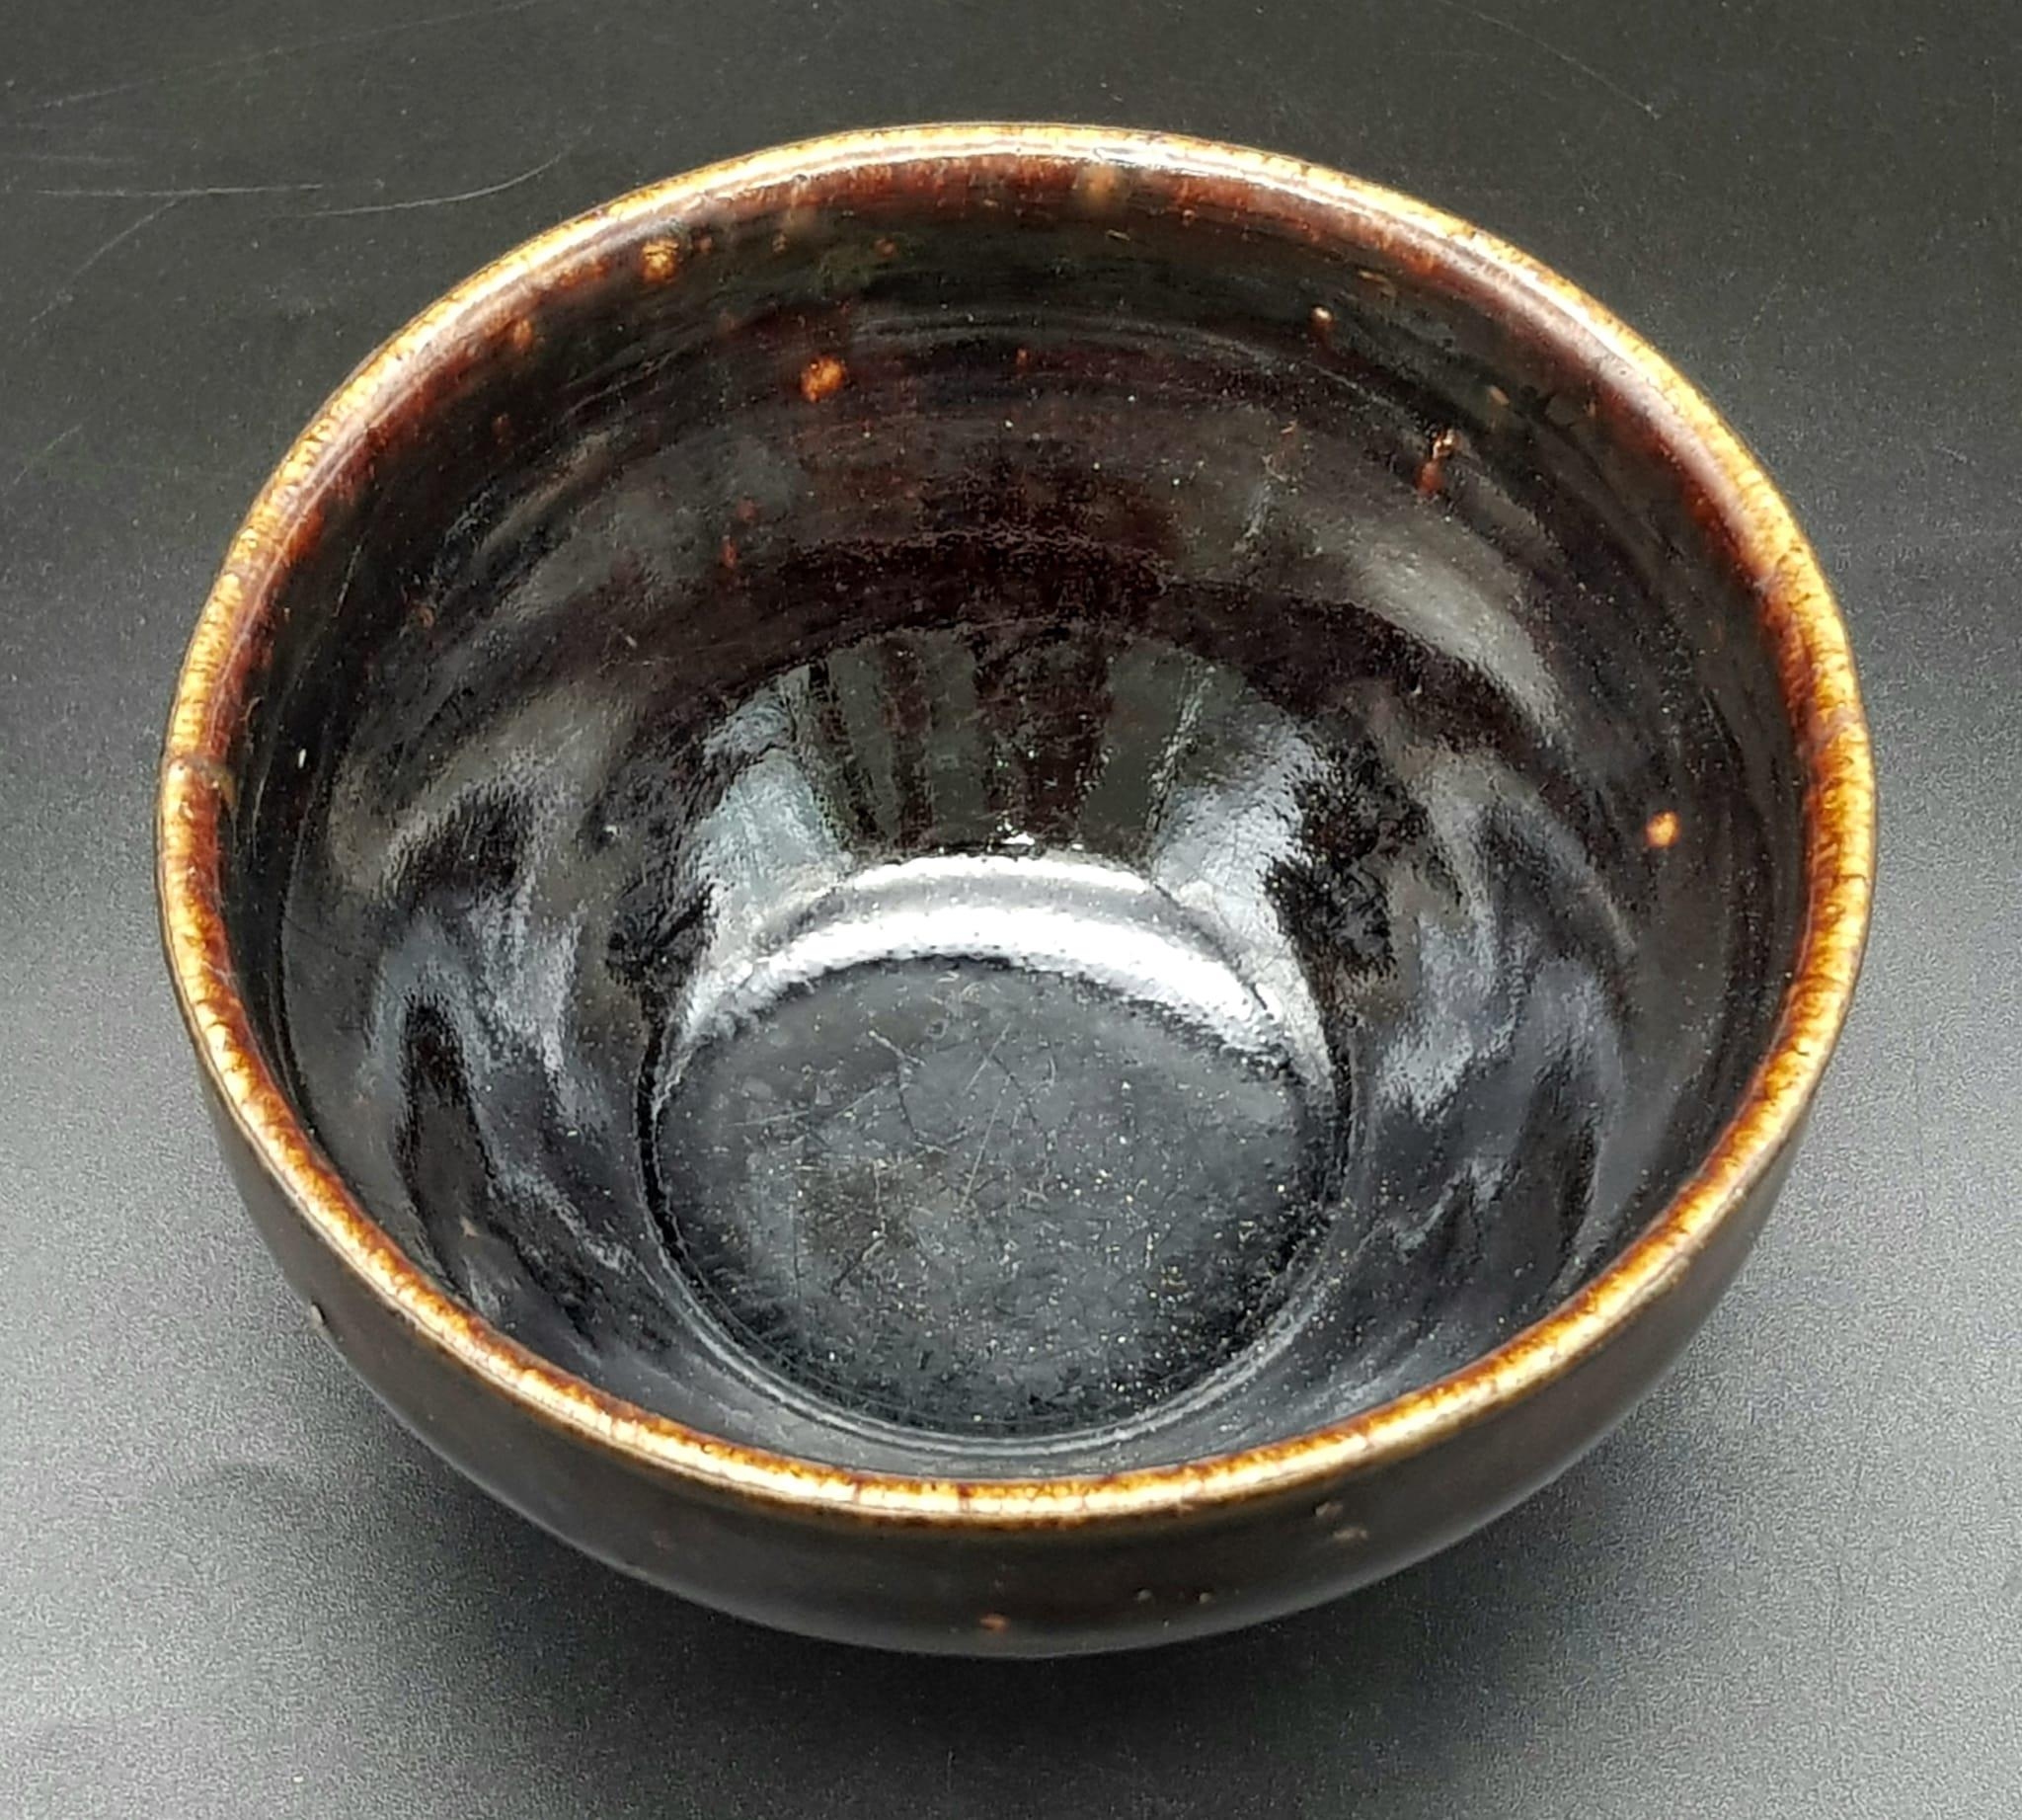 A VERY RARE CHINESE SONG PERIOD (900-1200) JIAN TEA BOWL , WITH A UNIQUE METAL BAND AROUND THE RIM - Bild 4 aus 6